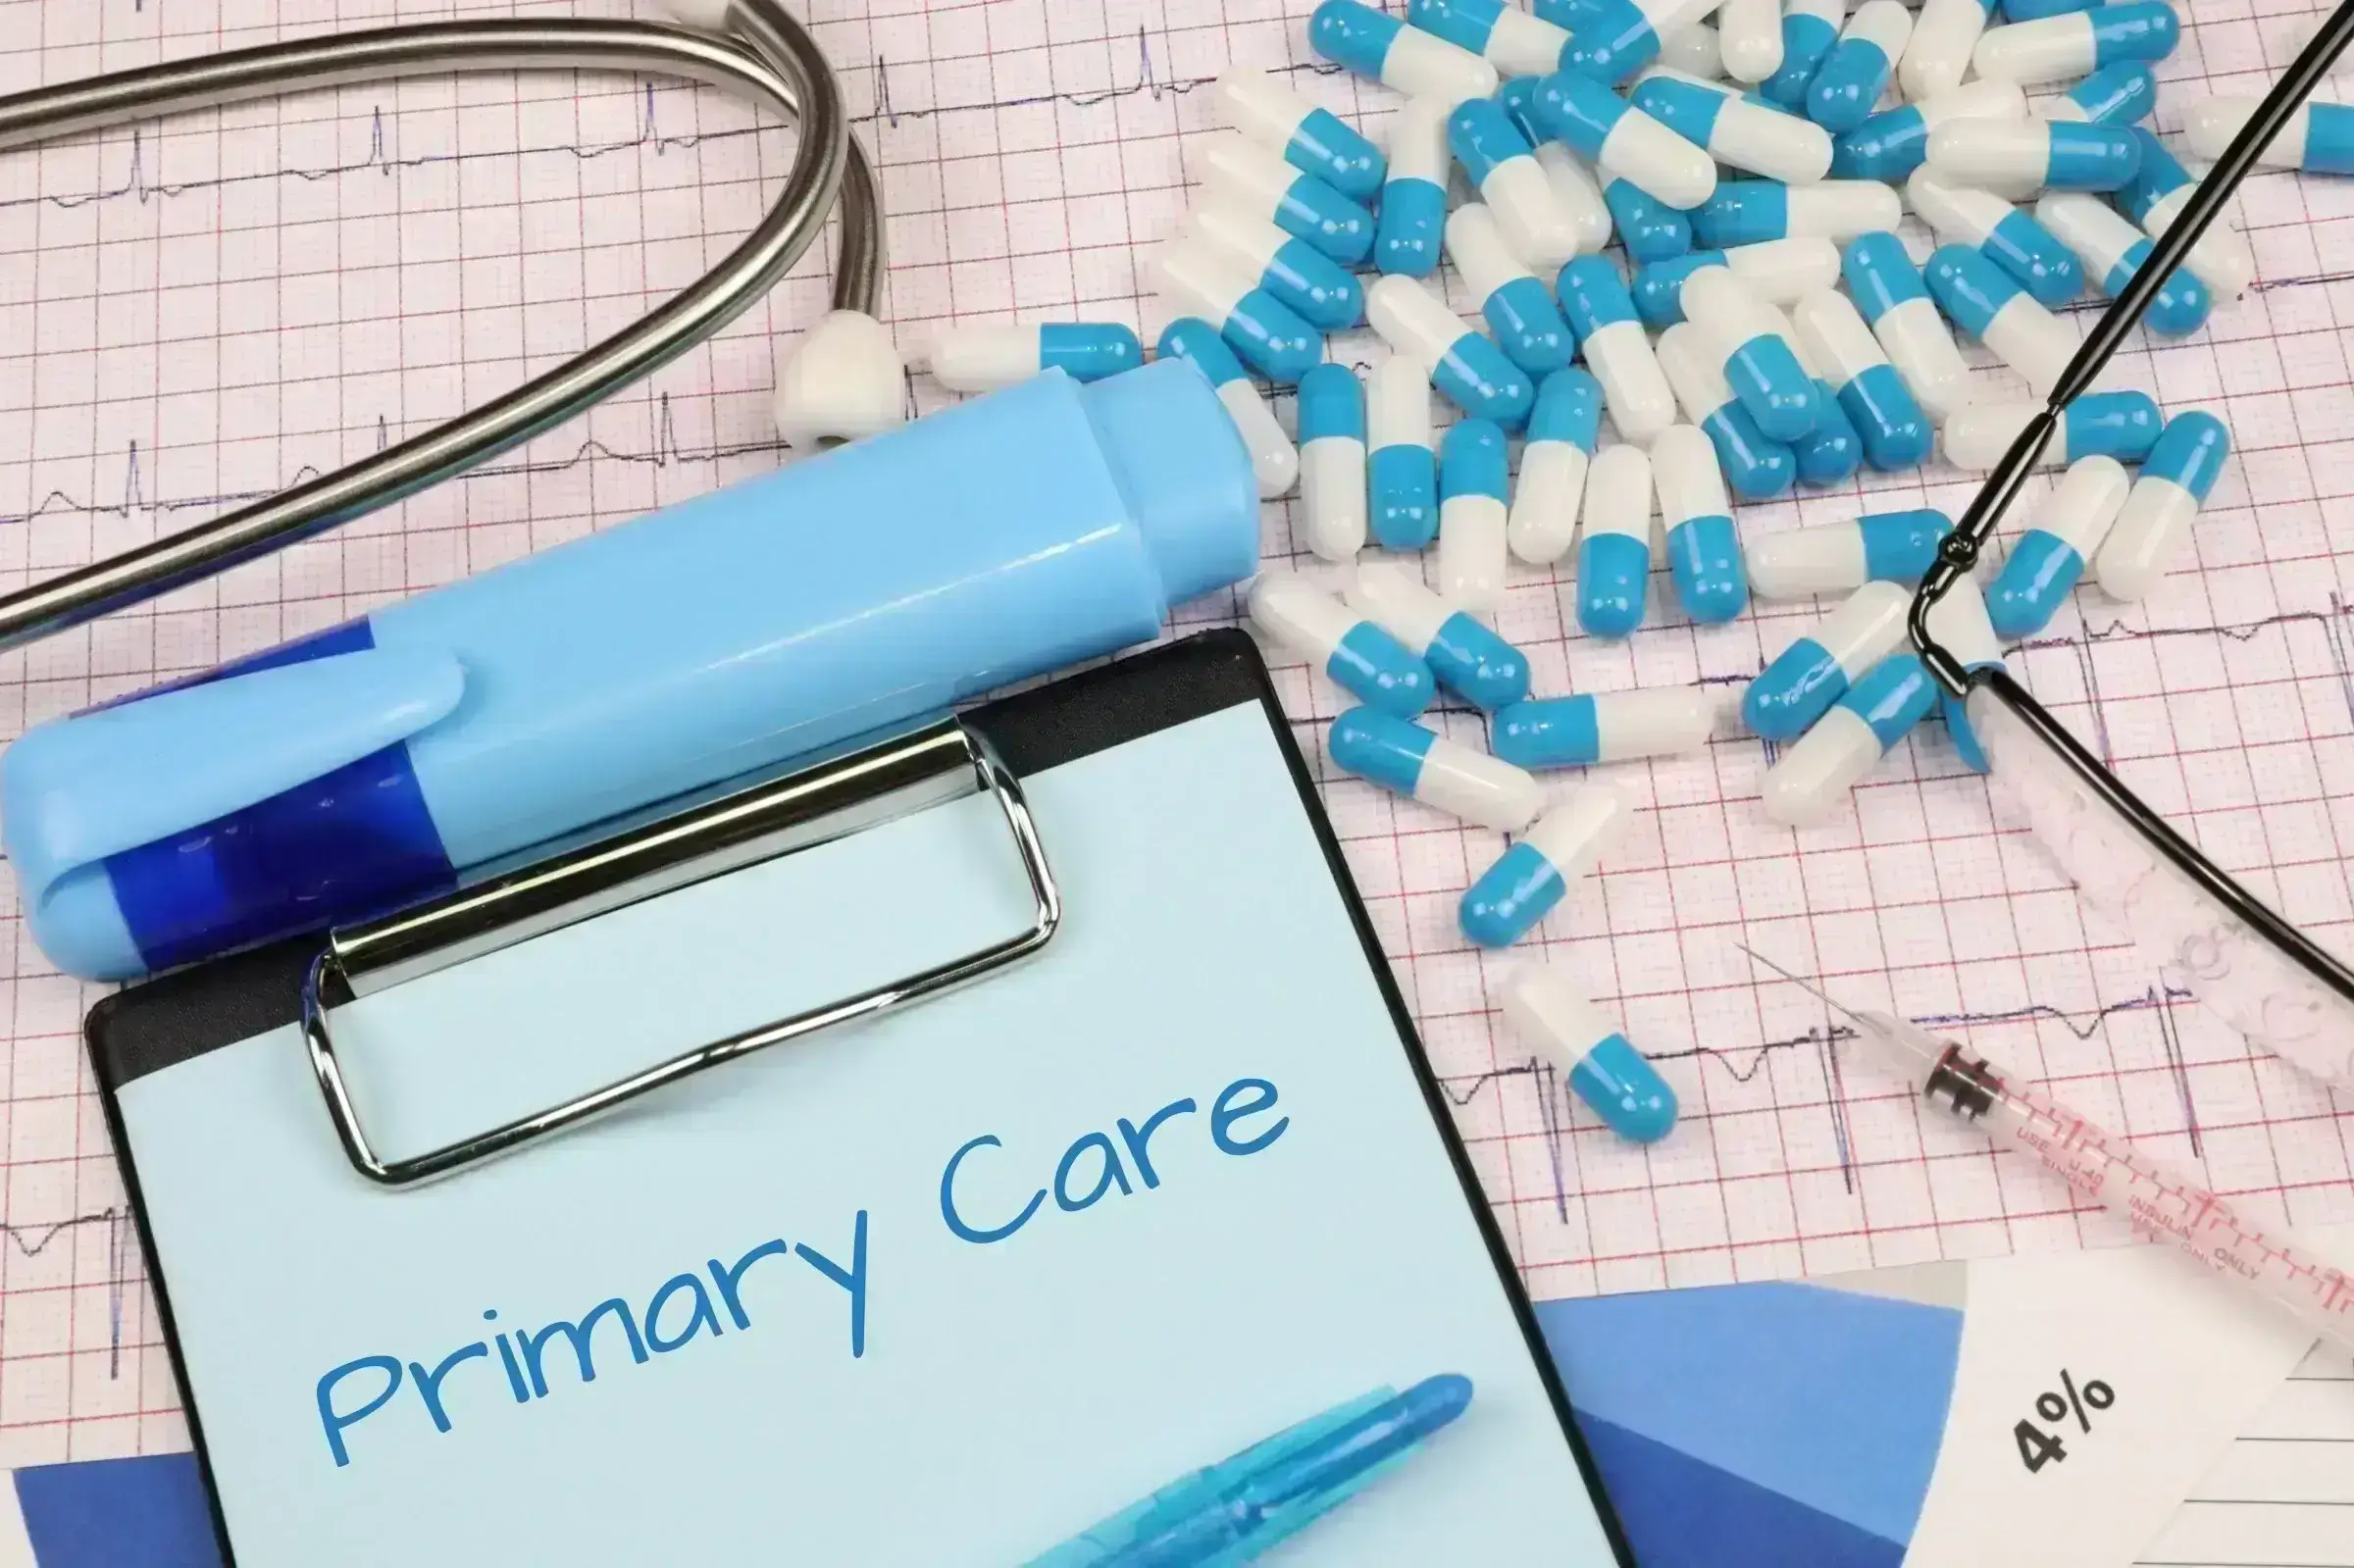 Primary Care and Everything You Need to Know about Primary Care Physicians in 2023